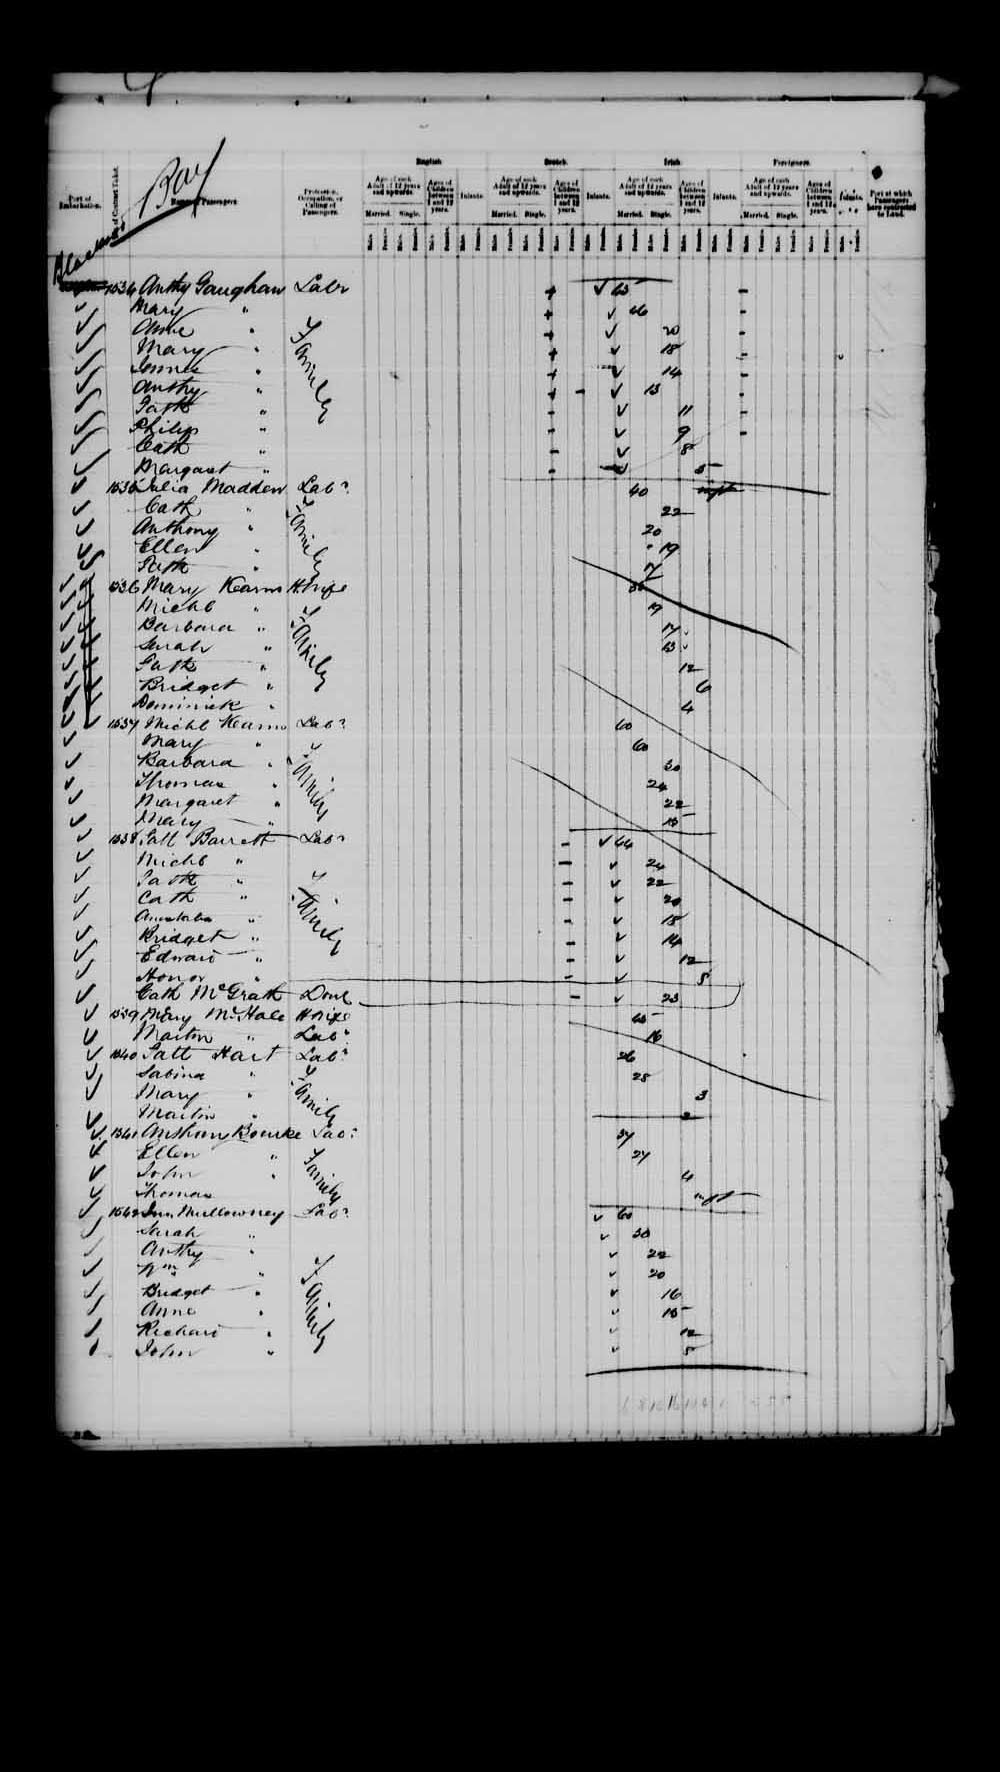 Digitized page of Passenger Lists for Image No.: e003542681